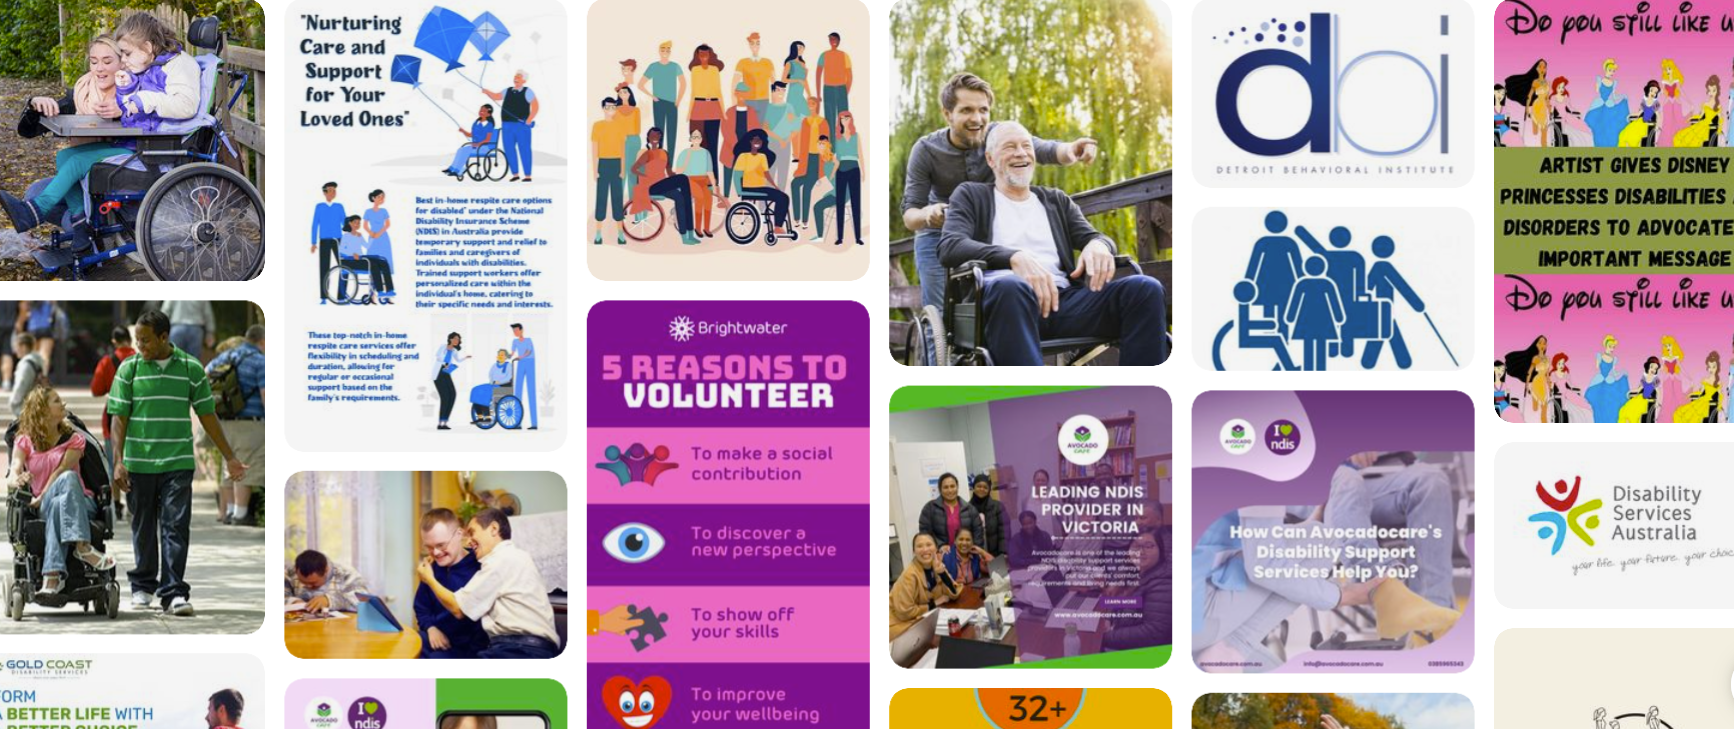 Pinterest can be a great way to share stories about your services as an NDIS Provider